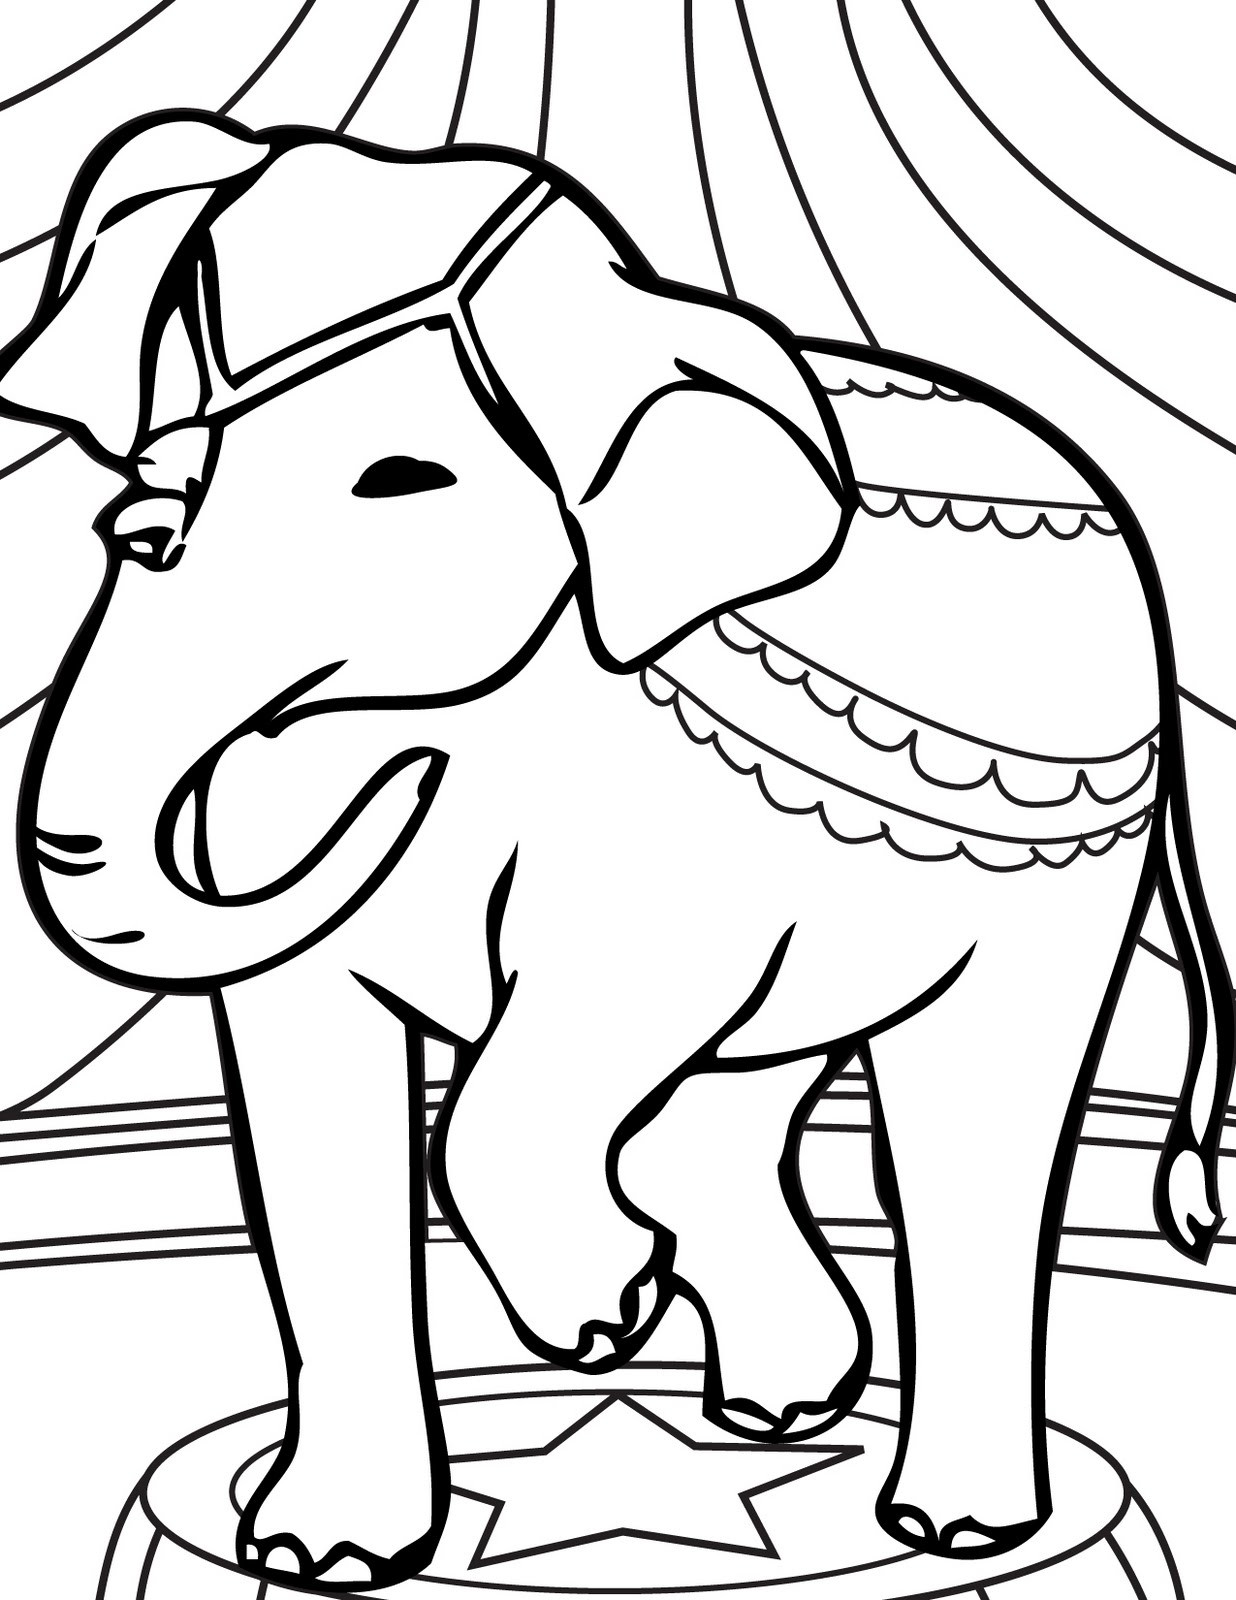 Kids Coloring Books
 transmissionpress Circus Elephant Coloring Pages